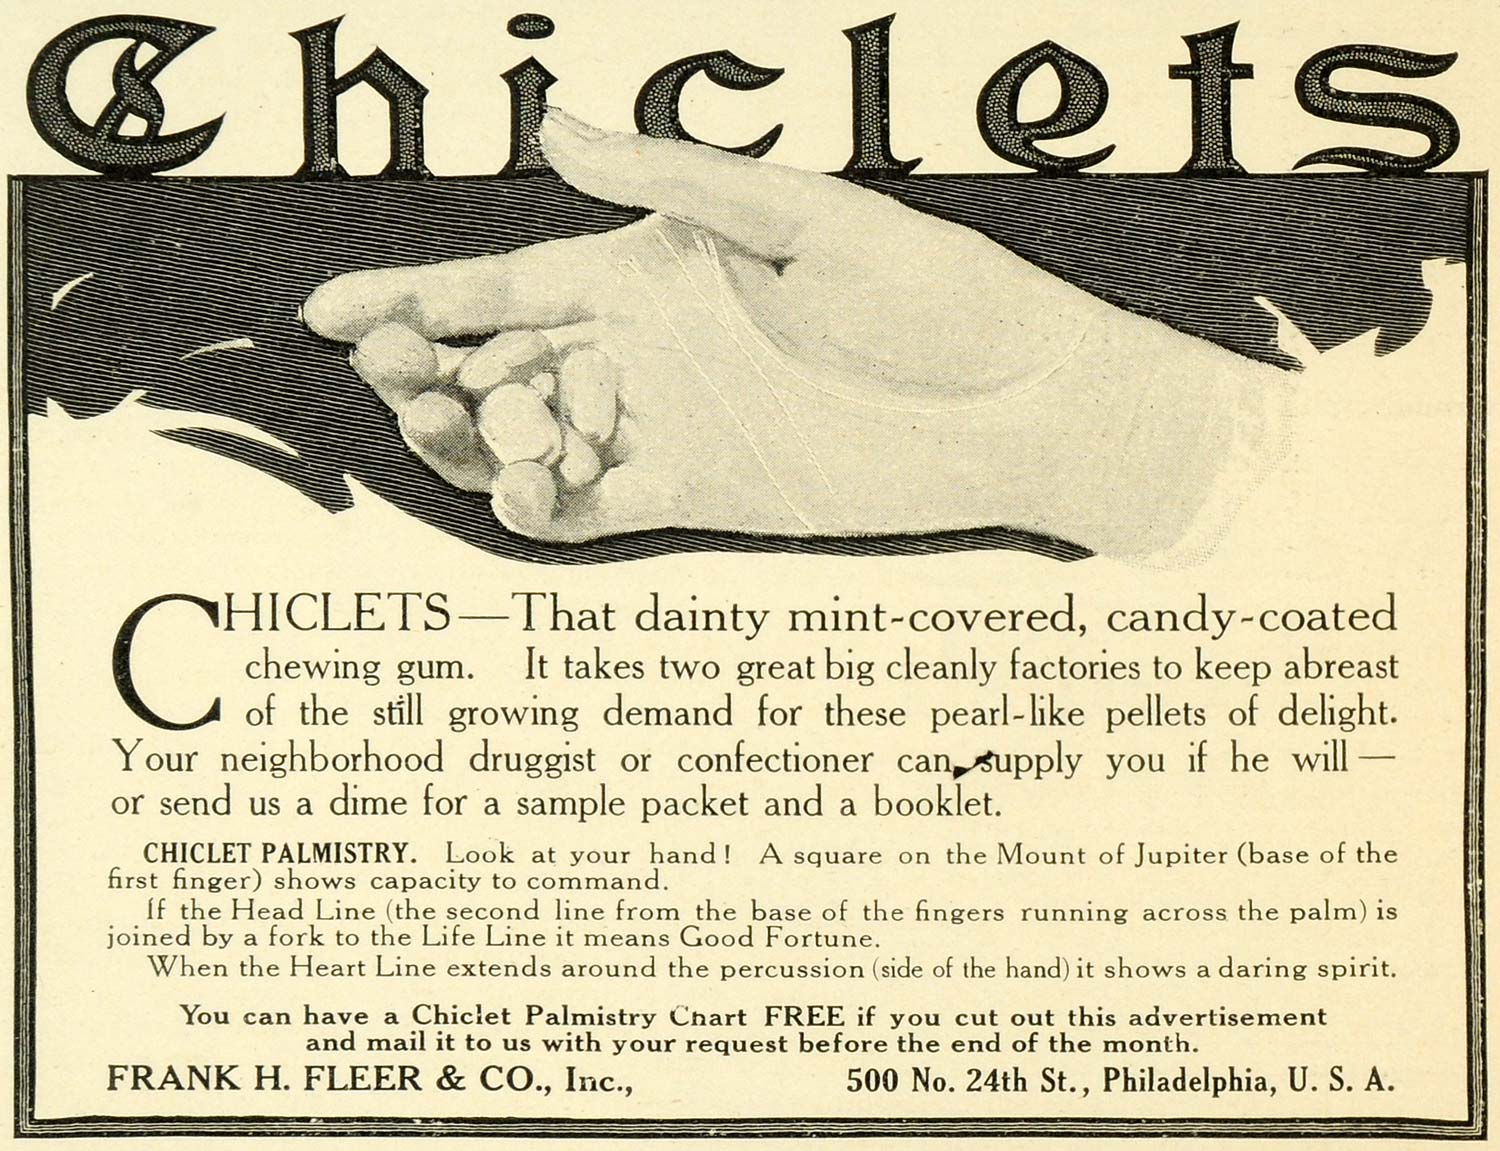 1907 Ad Frank H. Fleer Mint Coated Candy Chiclet Chewing Gum Hand Palm LHJ6